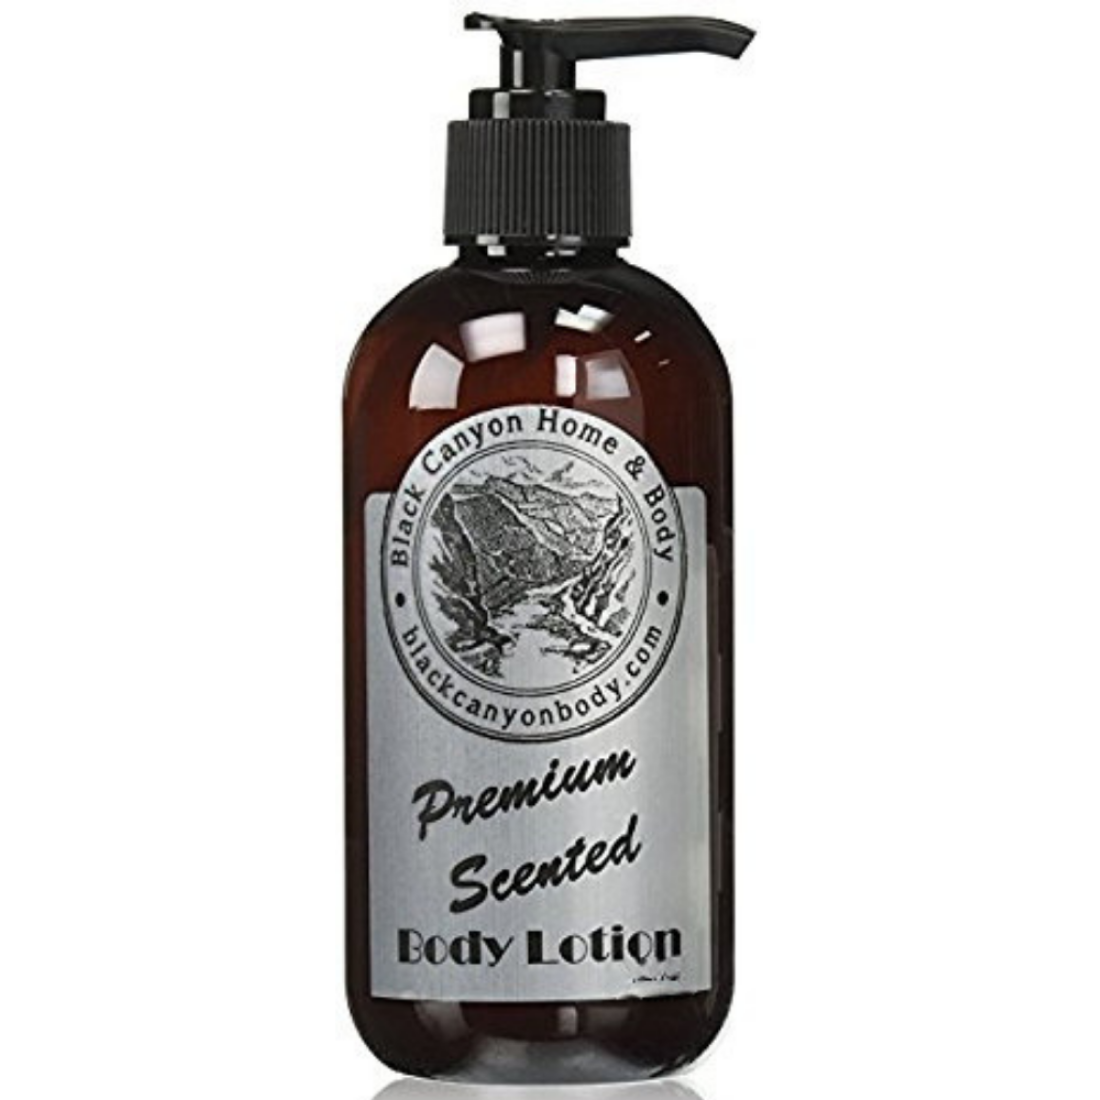 Black Canyon Berry & Orange Blossom Scented Luxury Body Lotion with Lanolin and Jojoba Oil